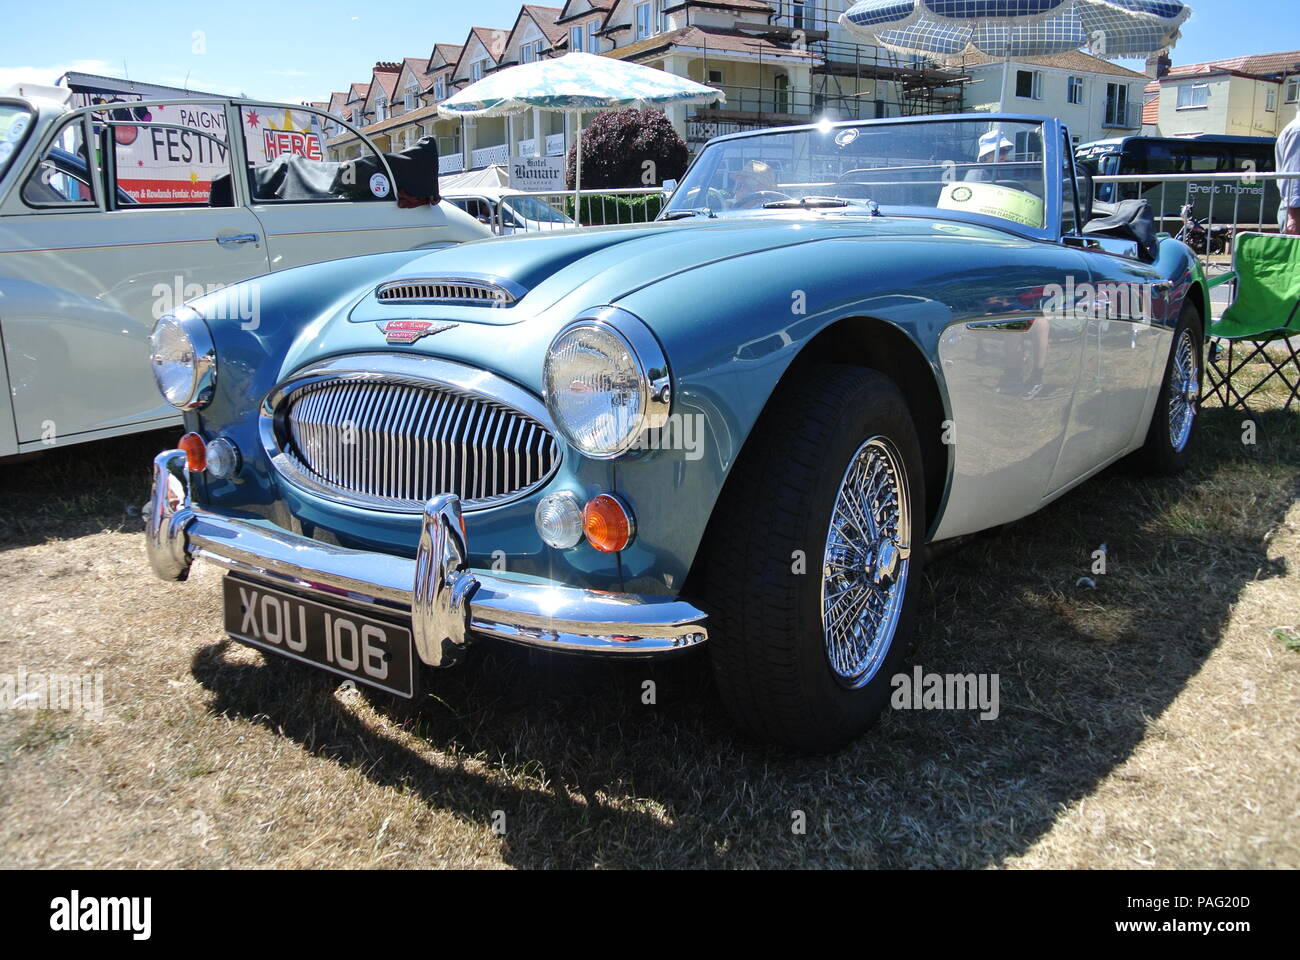 Austin Healey Mk3 3000 parked up on display at the English Riviera classic car show, Paignton, Devon, England, UK Stock Photo